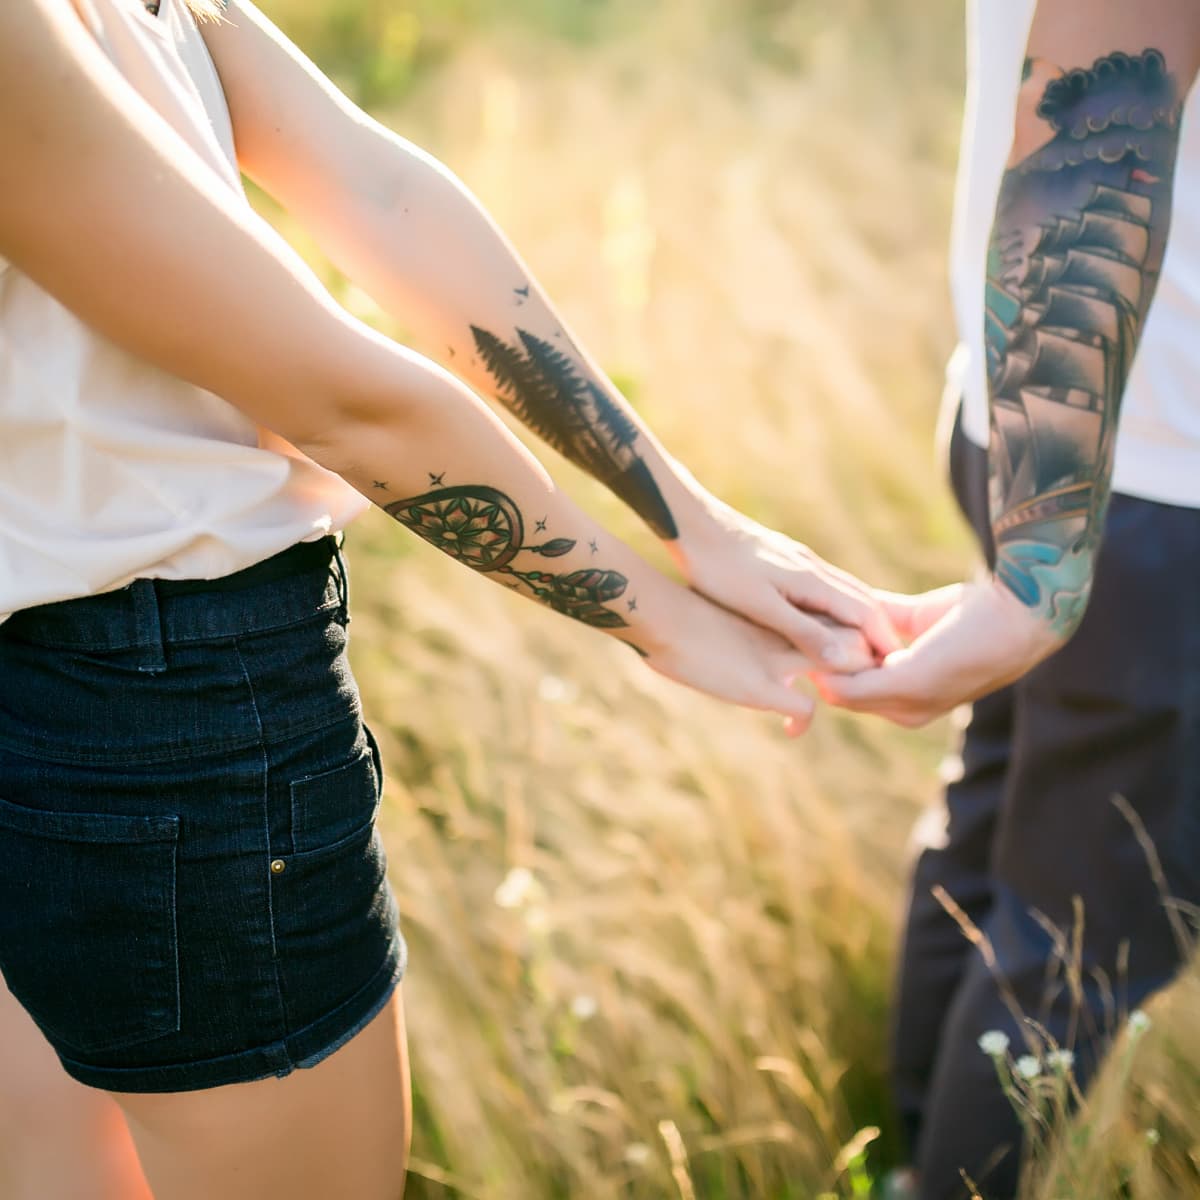 Person With Tattoo on Right Hand · Free Stock Photo